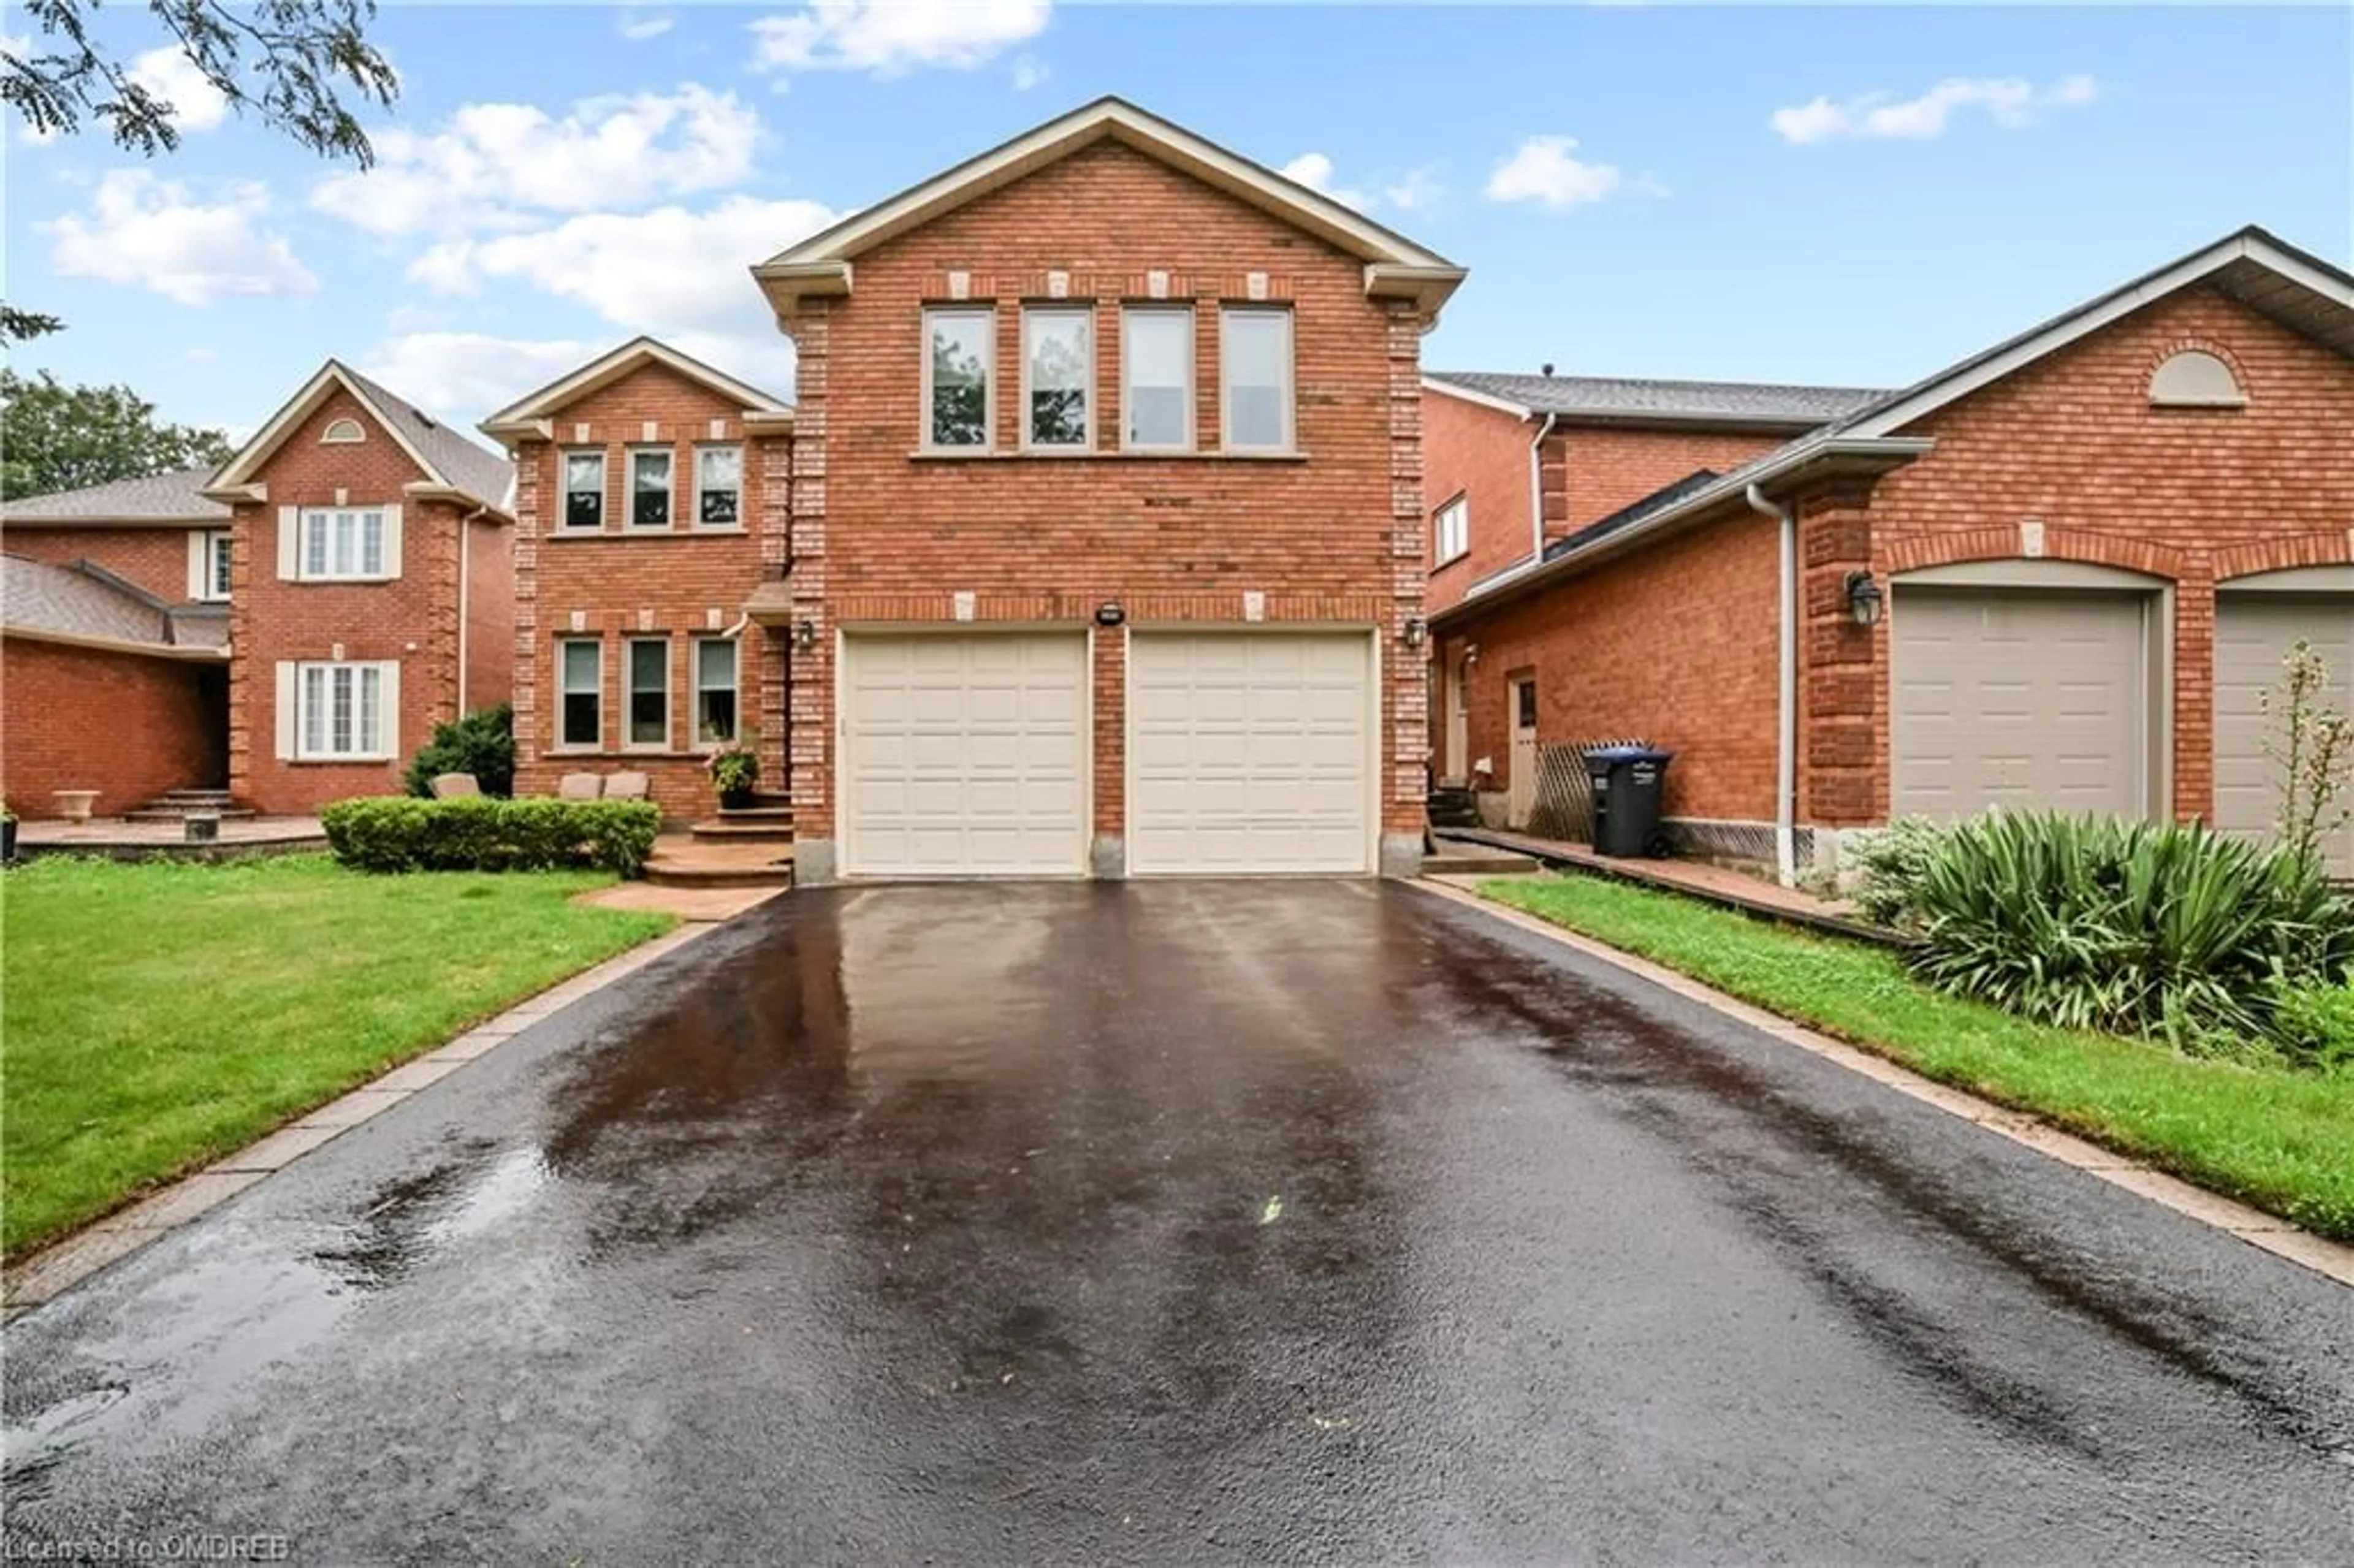 Home with brick exterior material for 2940 Harvey Cres, Mississauga Ontario L5L 4V8